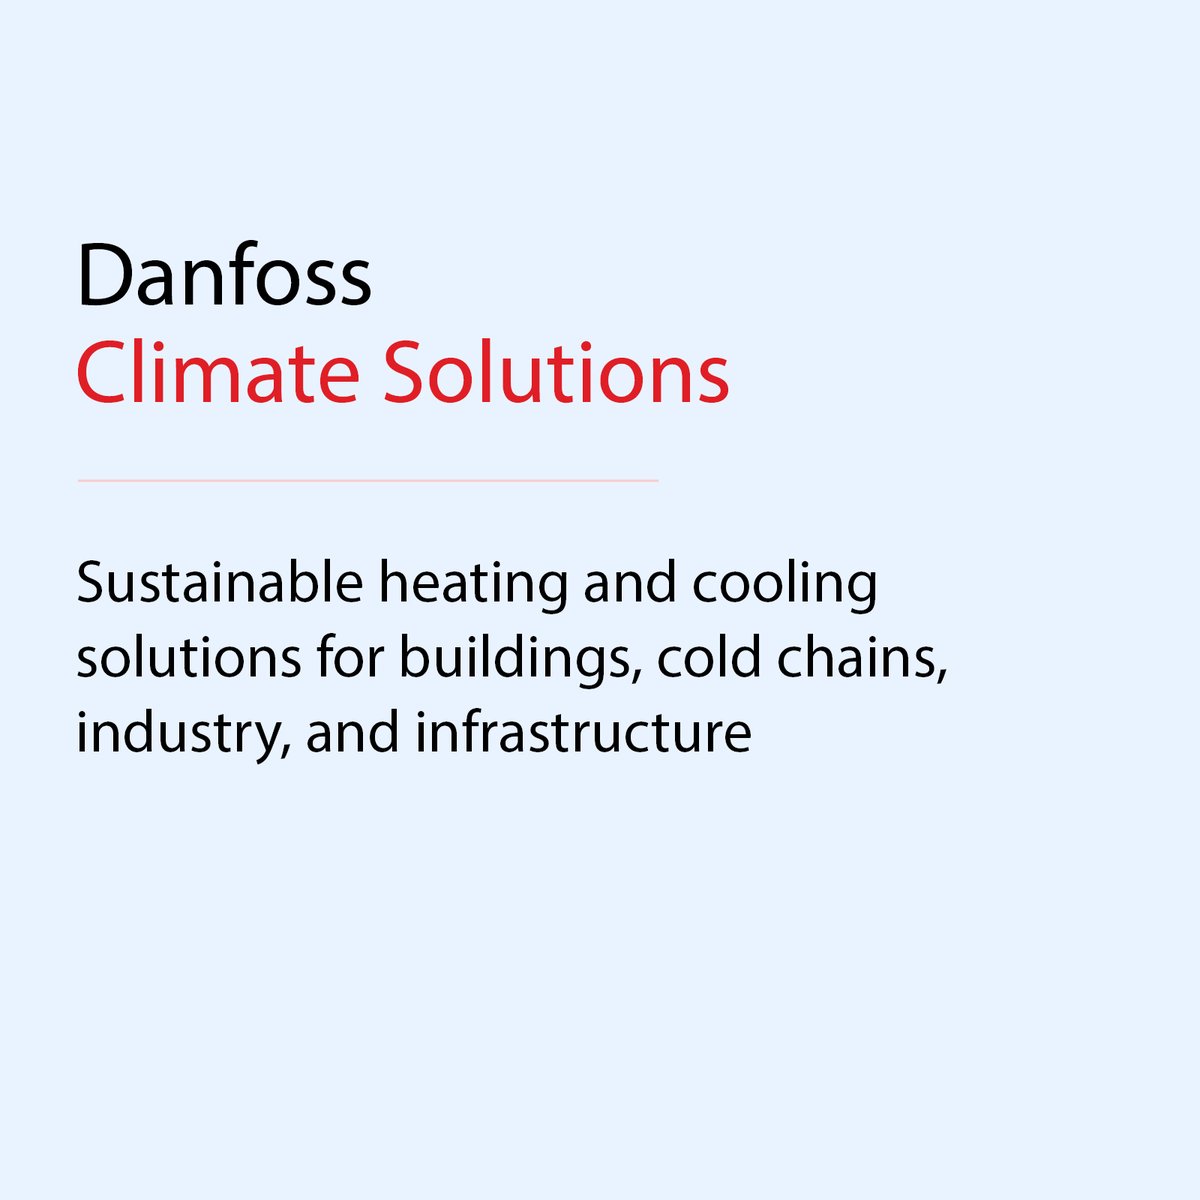 While supermarkets are an integral part of communities around the world, they are also big energy consumers and account for 3% of the total electricity used in industrialized countries. Read more: bit.ly/43iD3xd #Danfoss2023 #WhyEE #EnergyEfficiency #Decarbonization